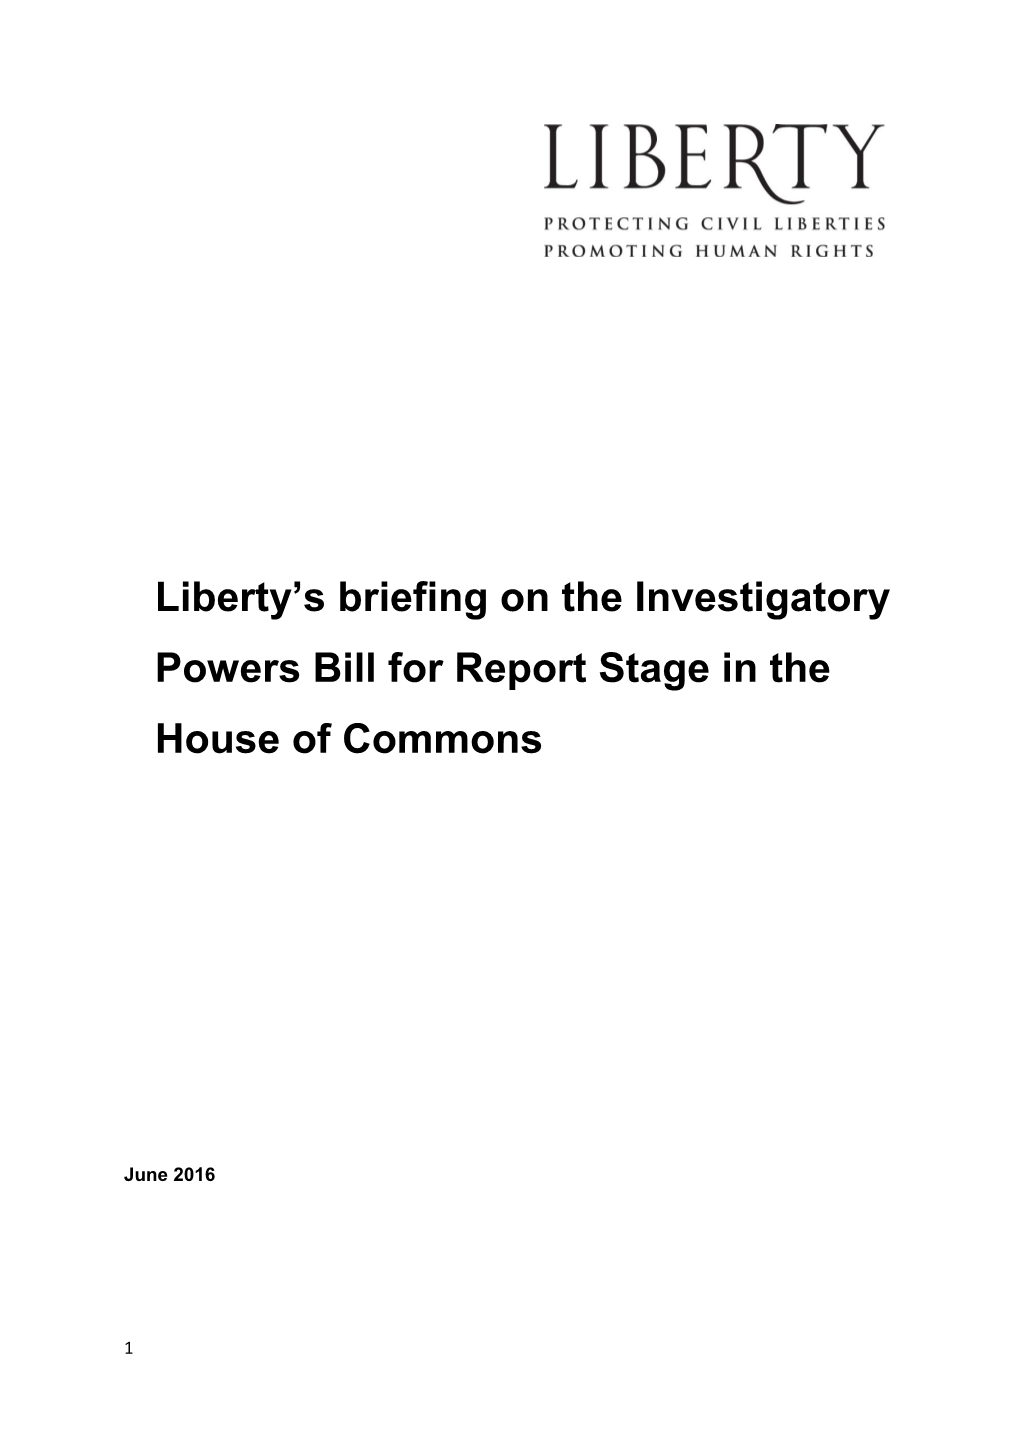 Liberty's Briefing on the Investigatory Powers Bill for Report Stage in the House of Commons